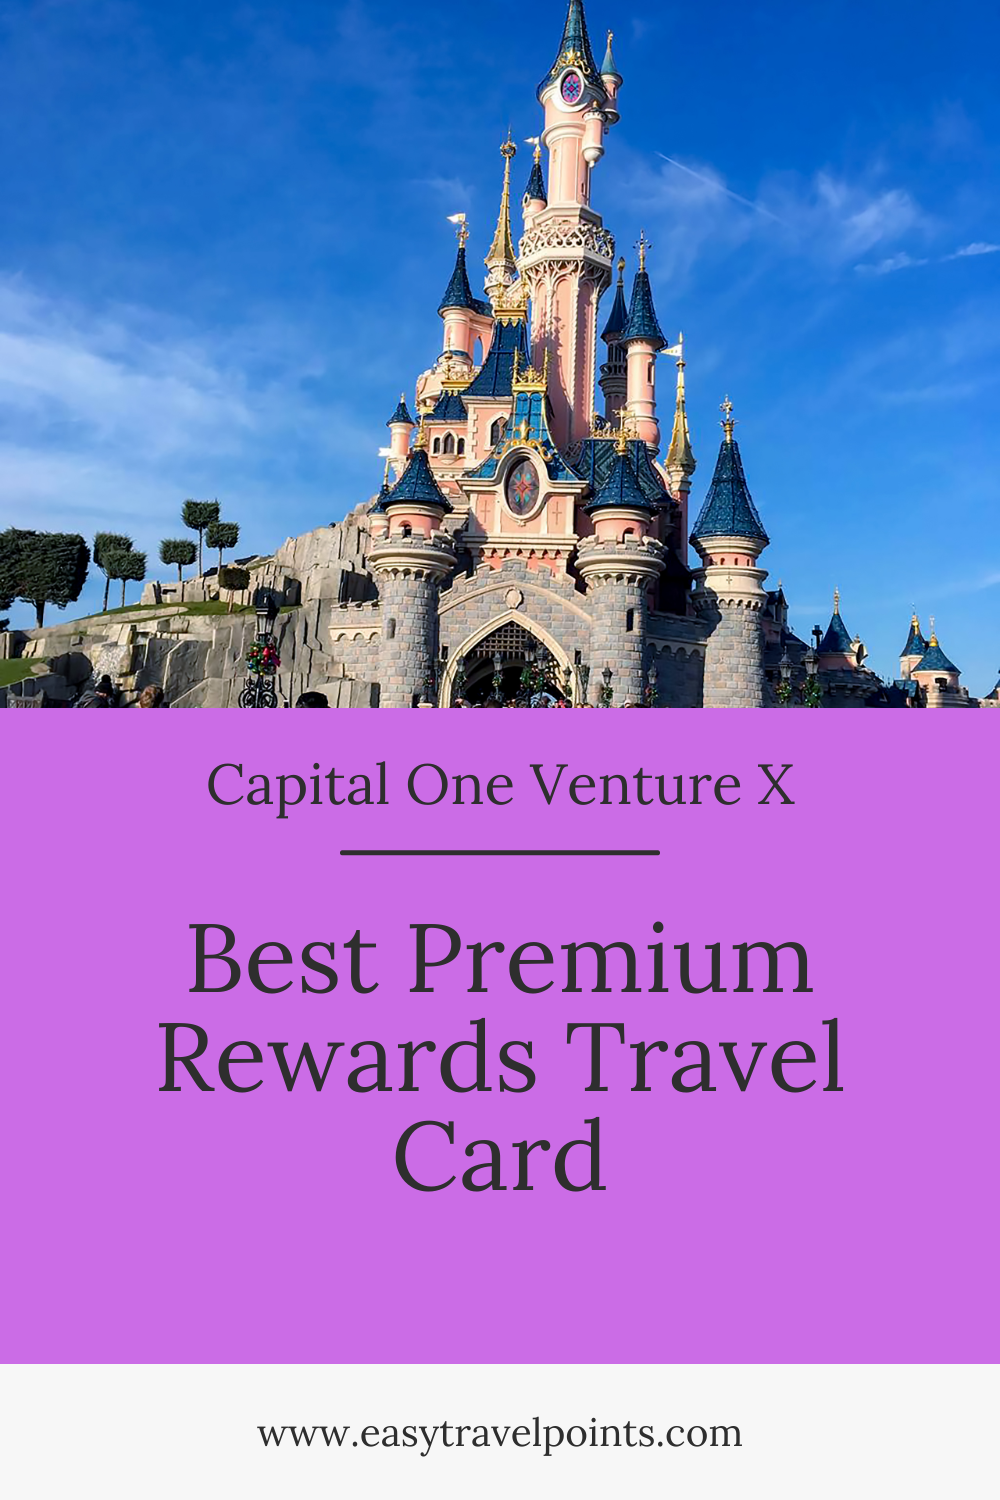 The Capital One Venture X credit card is one of my favorite travel rewards cards. This card comes with several great benefits, the points are easy to redeem and the annual fee is very reasonable. This is why the card is one of my favorites to recommend to most people.